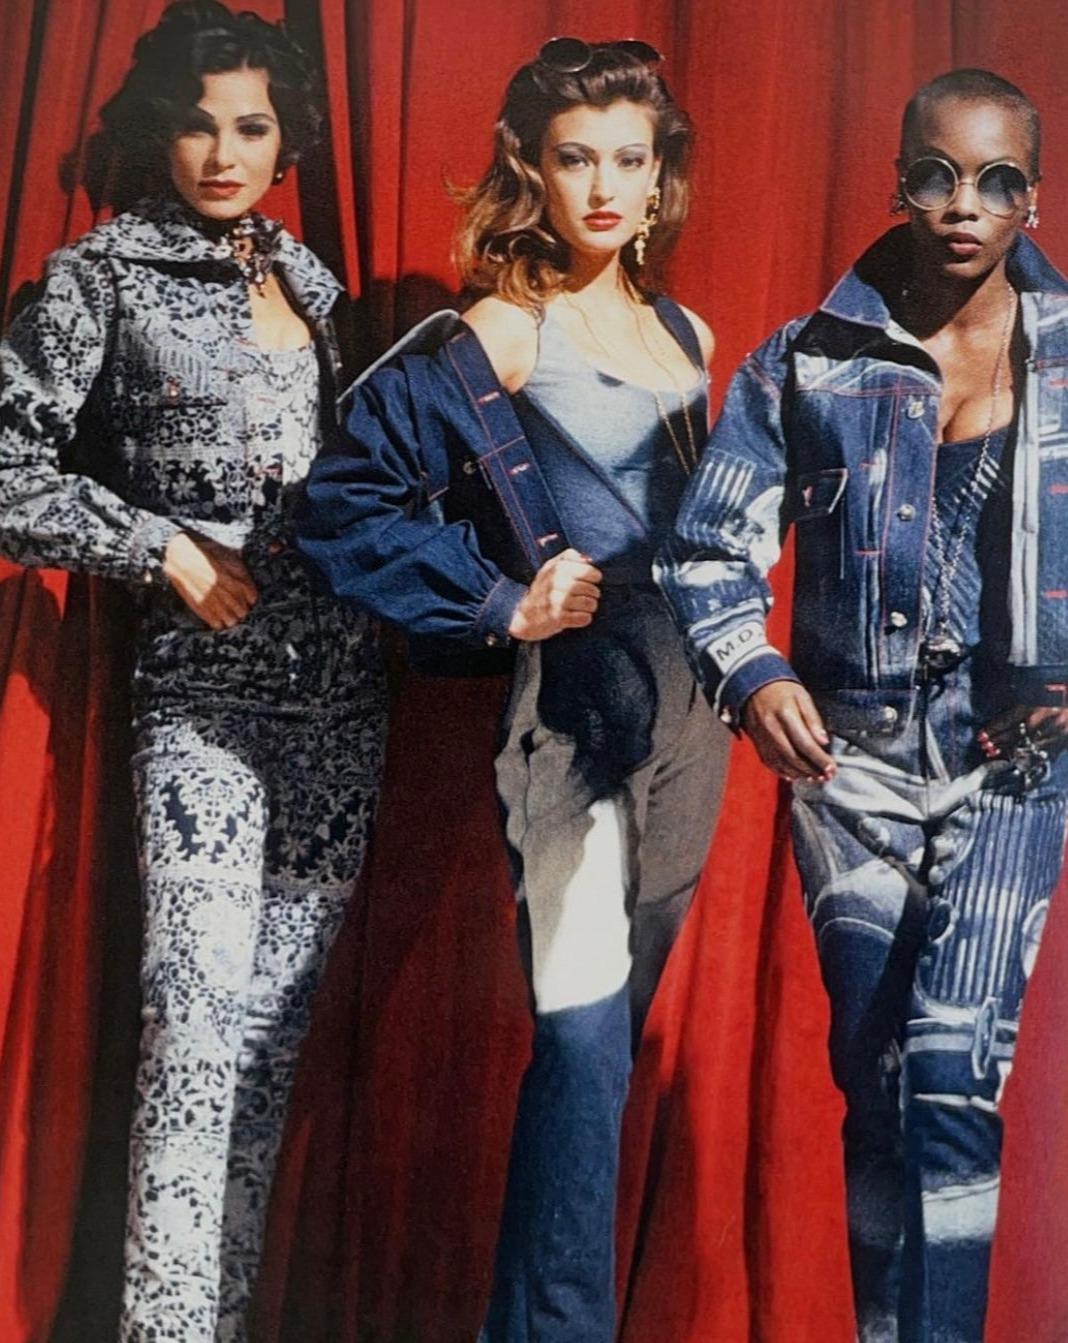 A/W 1992 Vivienne Westwood 'Always on Camera' Collection Rolls Royce printed jacket and jeans set. Denim printed jacket with red contrast stitching throughout. Signature Vivienne Westwood 'orb' buttons. High-rise wide leg denim pants feature